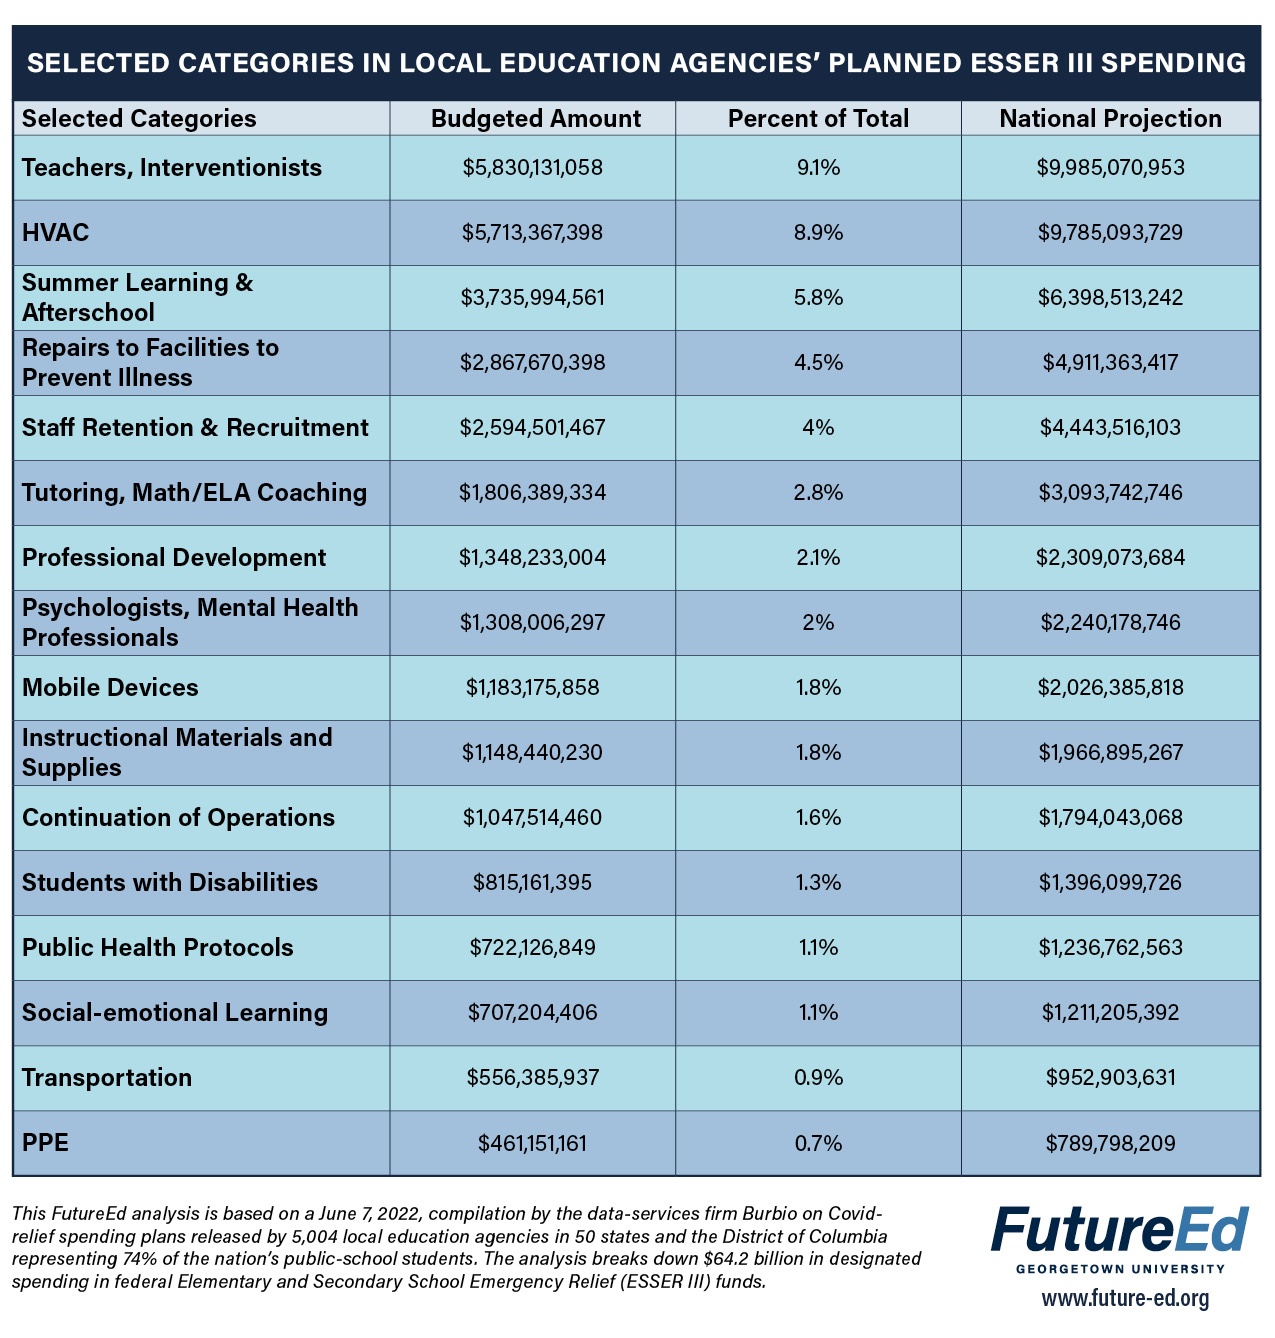 Chart: Selected Categories in Local Education Agencies’ Planned ESSER III Spending. Teachers, Interventionists: budgeted amount $5,830,131,058; percent of total 9.1%; national projection $9,985,070,953. HVAC: budgeted amount $5,713,367,398; percent of total 8,9%; national projection $9,785,093,729. Summer Learning & Afterschool: budgeted amount $3,735,994,561; percent of total 5.8%; national projection $6,398,513,242. Repairs to Facilities to Prevent Illness: budgeted amount $2,867,670,398; percent of total 4.5%; national projection $4,911,363,417. Staff Retention & Recruitment: budgeted amount $2,594,501,467; percent of total 4%; national projection $4,443,516,103. Tutoring, Math/ELA Coaching: budgeted amount $1,806,389,334; percent of total 2.8%; national projection $3,093,742,746. Professional Development: budgeted amount $1,348,233,004; percent of total 2.1%; national projection $2,309,073,684. Psychologists, Mental Health Professionals: budgeted amount $1,308,006,297; percent of total 2%; national projection $2,240,178,746; Mobile Devices: budgeted amount $1,183,175,858; percent of total 1.8%; national projection $2,026,385,818. Instructional Materials and Supplies: budgeted amount $1,148,440,230; percent of total 1.8%; national projection $1,966,895,267. Continuation of Operations: budgeted amount $1,047,514,460; percent of total 1.6%; national projection $1,794,043,068. Students with Disabilities: budgeted amount $815,161,395; percent of total 1.3%; national projection $1,396,099,726. Public Health Protocols: budgeted amount $722,126,849; percent of total 1.1%; national projection $1,236,762,563. Social-emotional Learning: budgeted amount $707,204,406; percent of total 1.1%; budgeted amount $1,211,205,392. Transportation: budgeted amount $556,385,937; percent of total 0.9%; national projection $952,903,631. PPE: budgeted amount $461,151,161; percent of total 0.7%; national projection $789,798,209. (This FutureEd analysis is based on a June 7, 2022, compilation by the data-services firm Burbio on Covid-relief spending plans released by 5,004 local education agencies in 50 states and the District of Columbia representing 74% of the nation’s public-school students. The analysis breaks down $64.2 billion in designated spending in federal Elementary and Secondary School Emergency Relief (ESSER III) funds.)